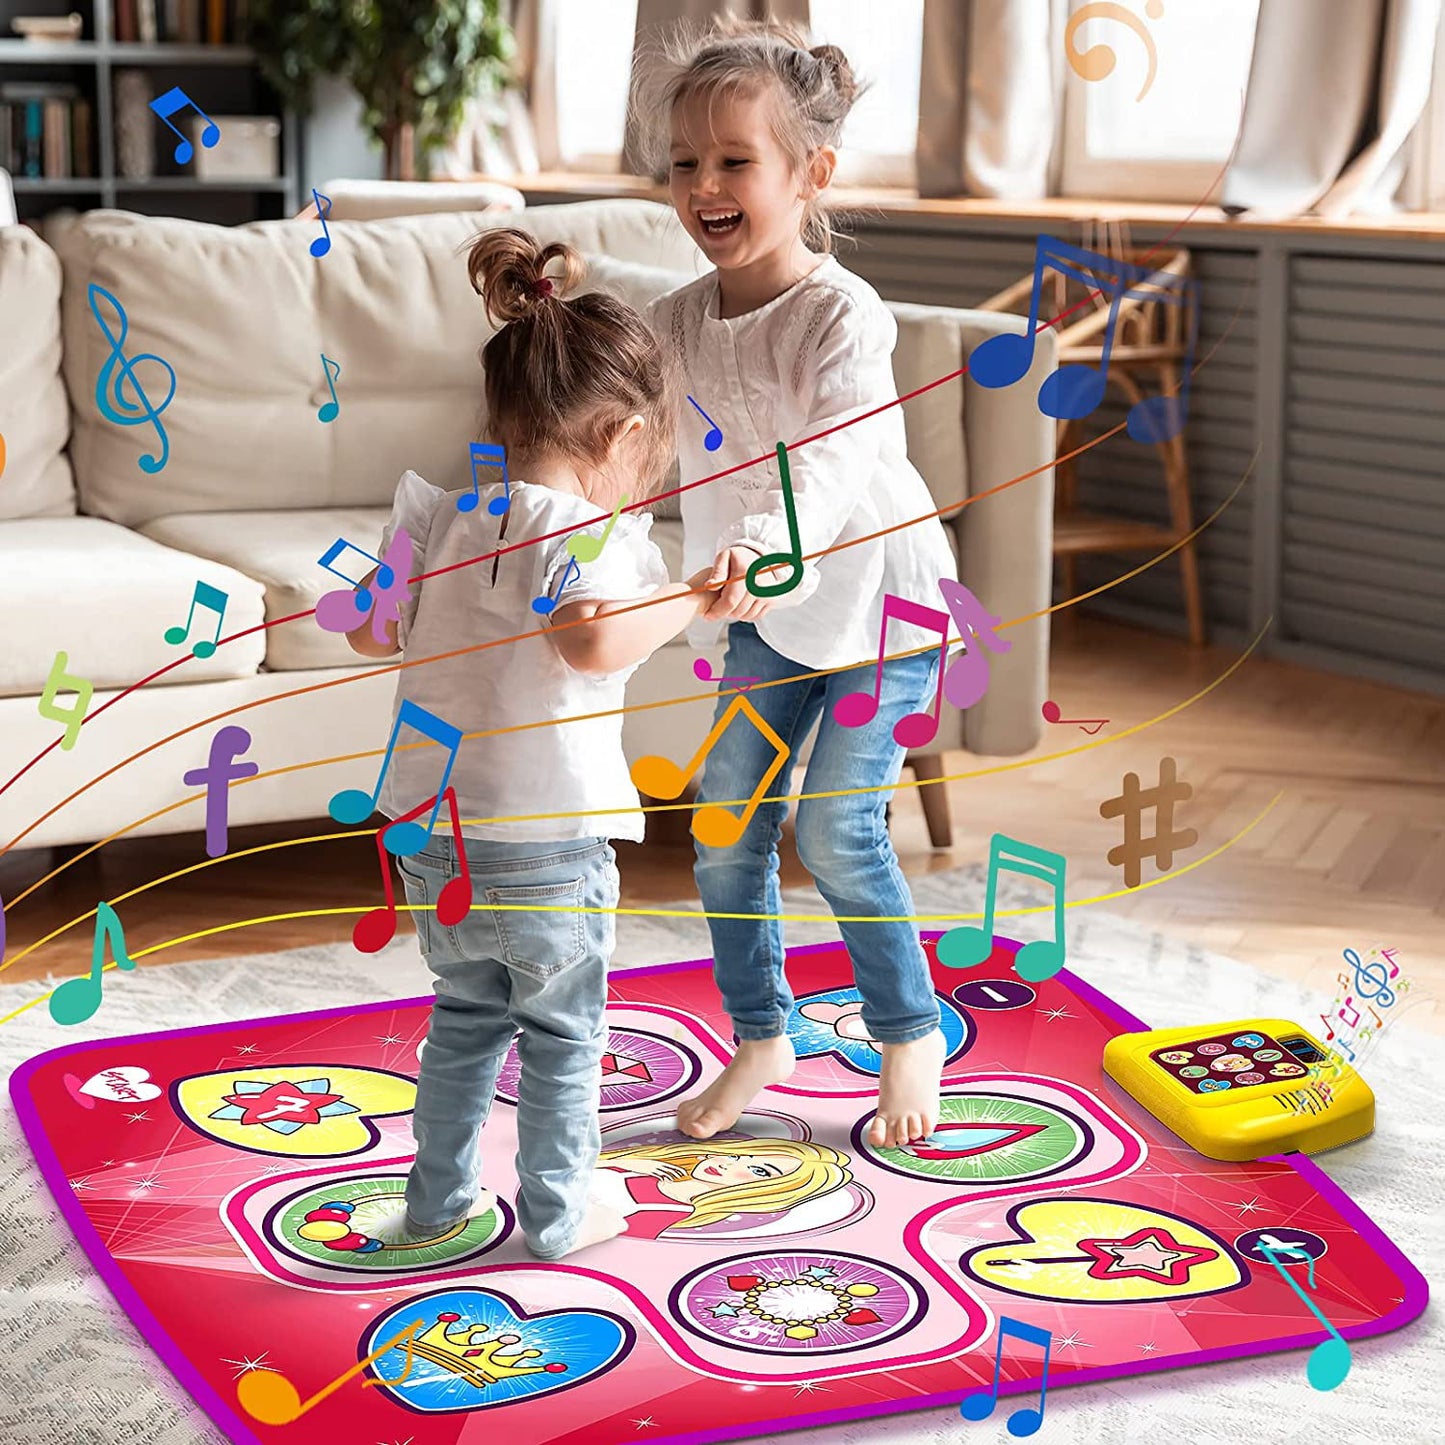 Dance Mat for Kids, 5 Modes Dance Pad Musical Educational Toy Gifts for Little Girls Boys Aged 3+